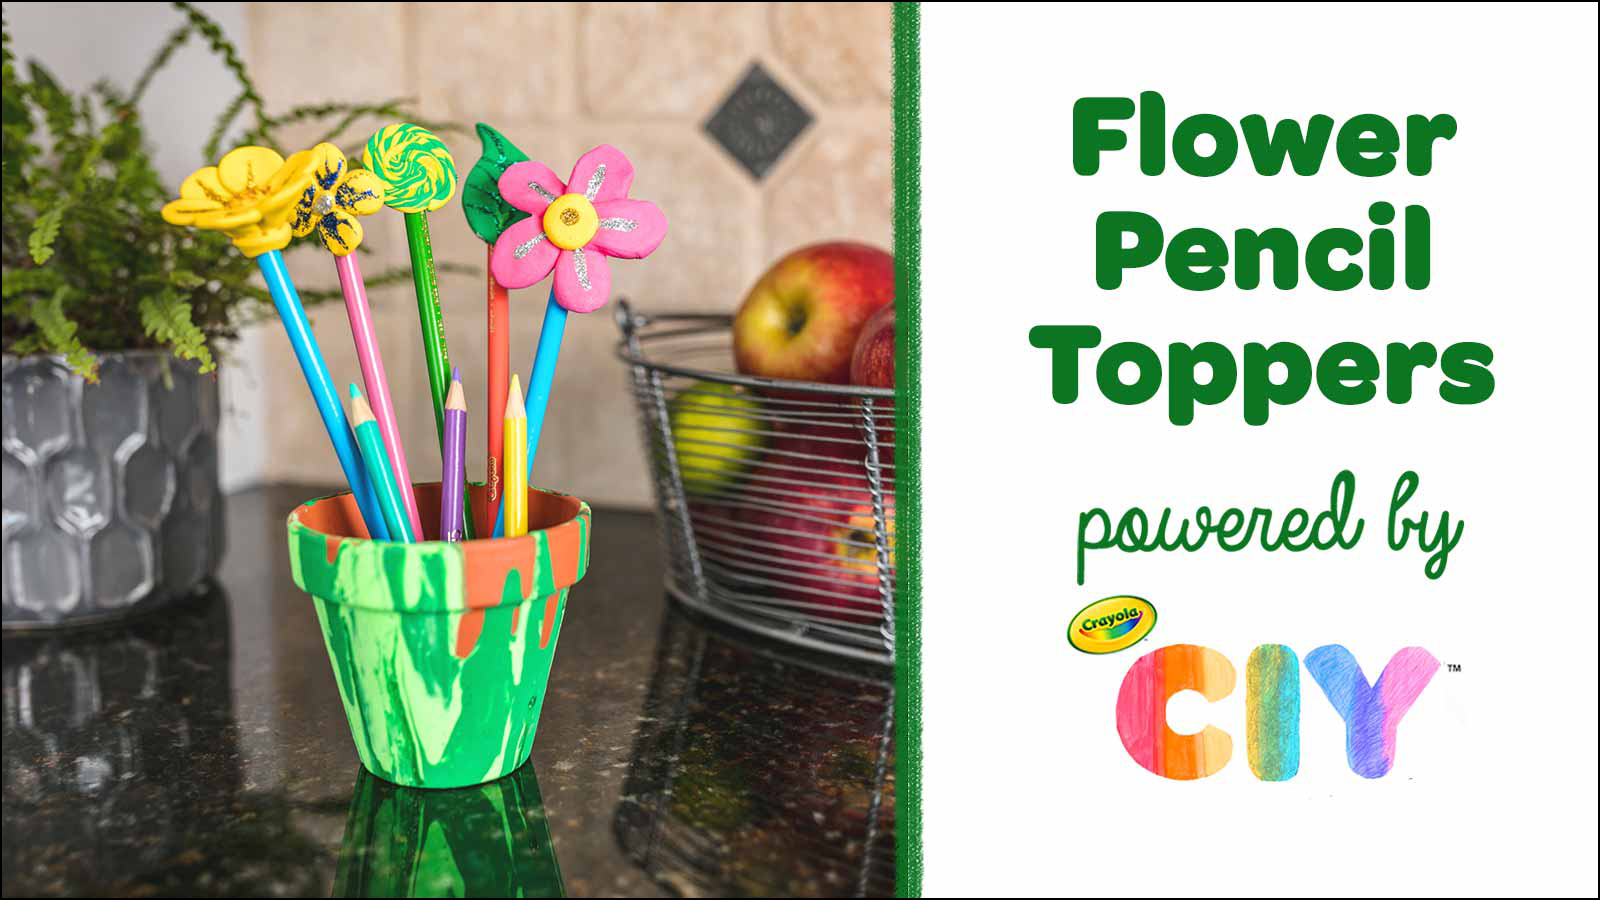 Flower Pencil Toppers CIY Video Poster Frame